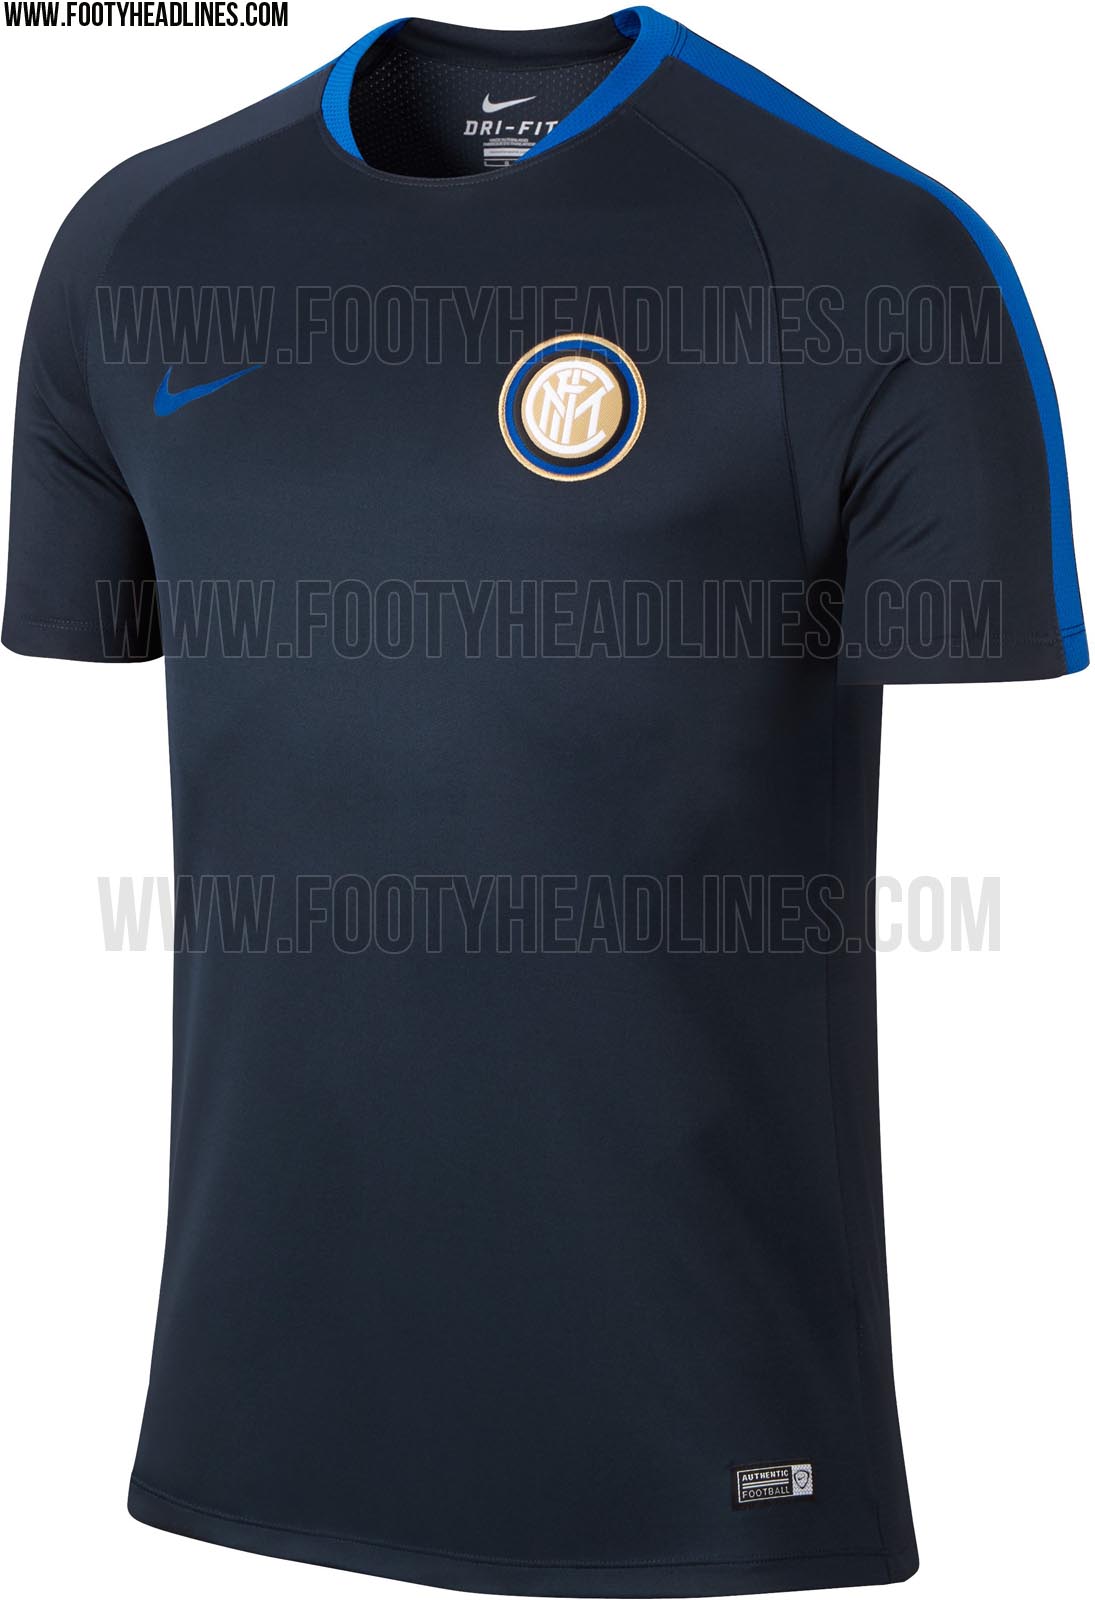 Inter 15-16 Pre-Match and Training Shirts Released - Footy Headlines